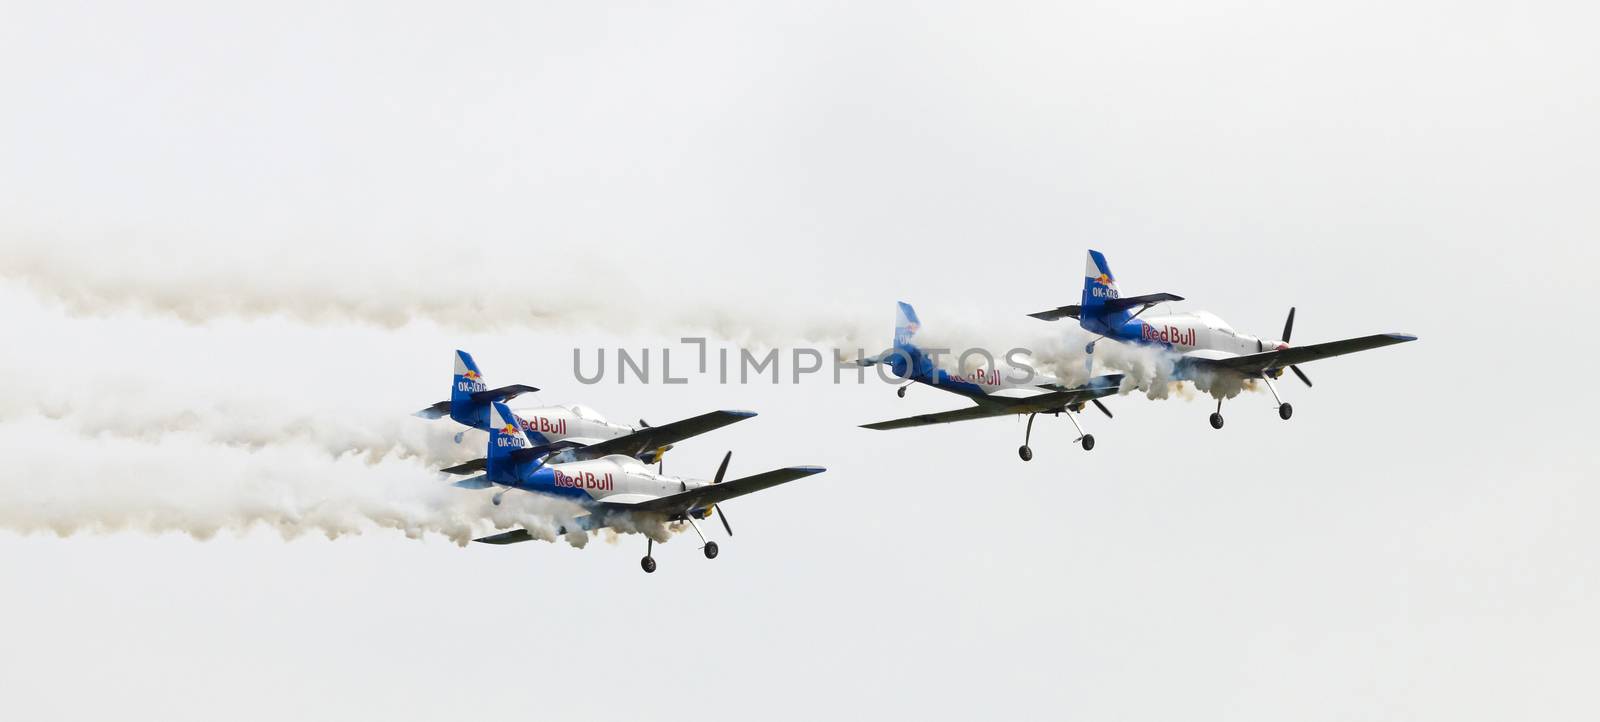 Flying Bulls Aerobatics Team on the Airshow "The Day on Air" by hanusst